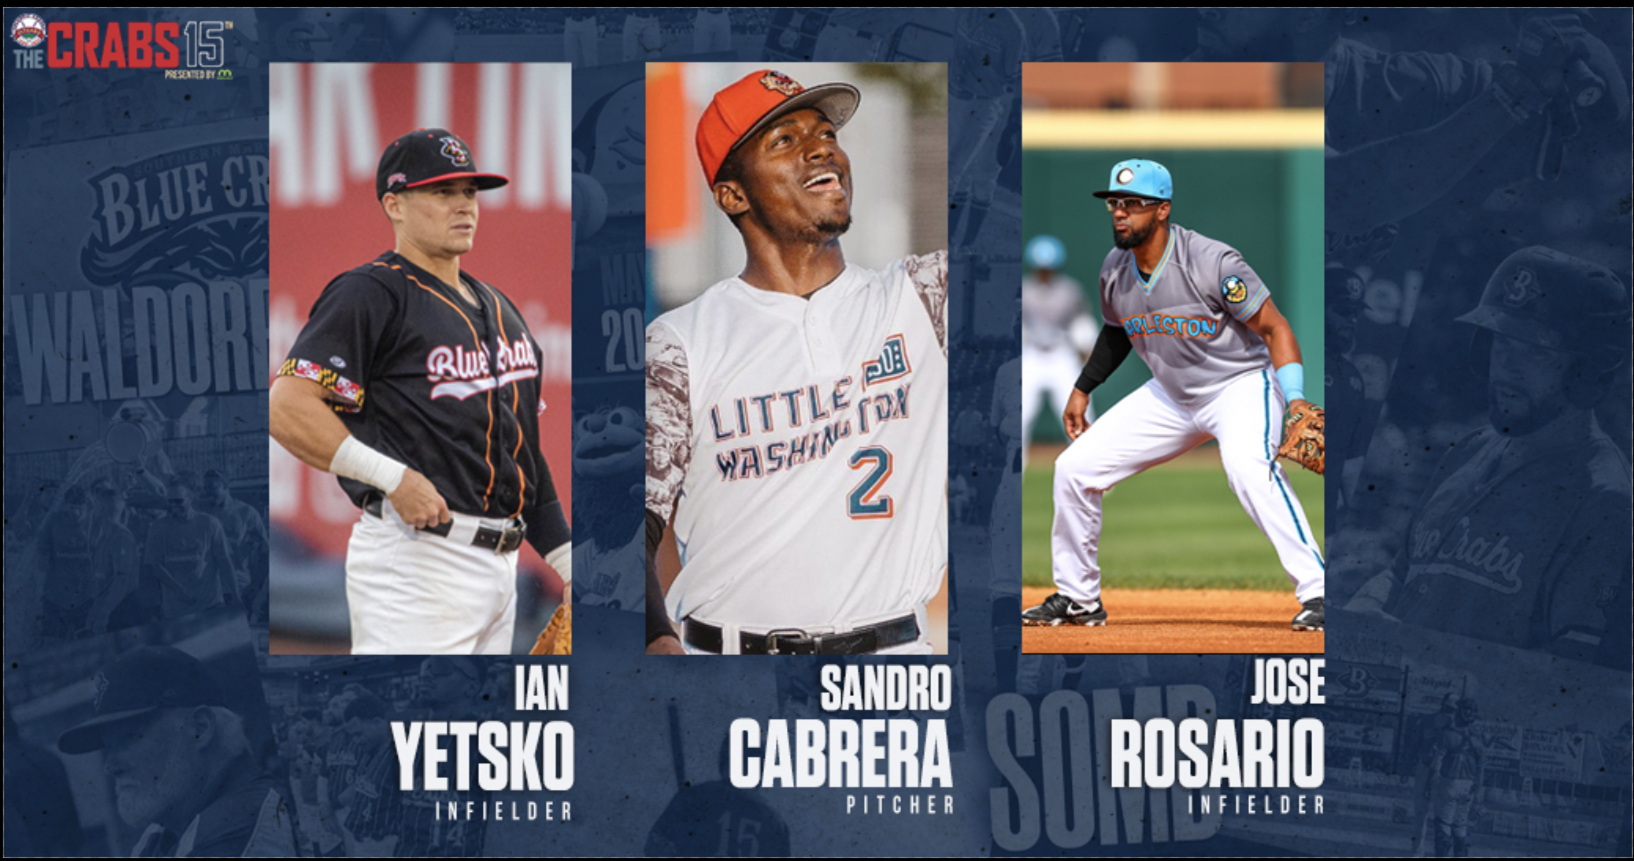 Blue Crabs Announce First Players to Join 15th Anniversary Roster